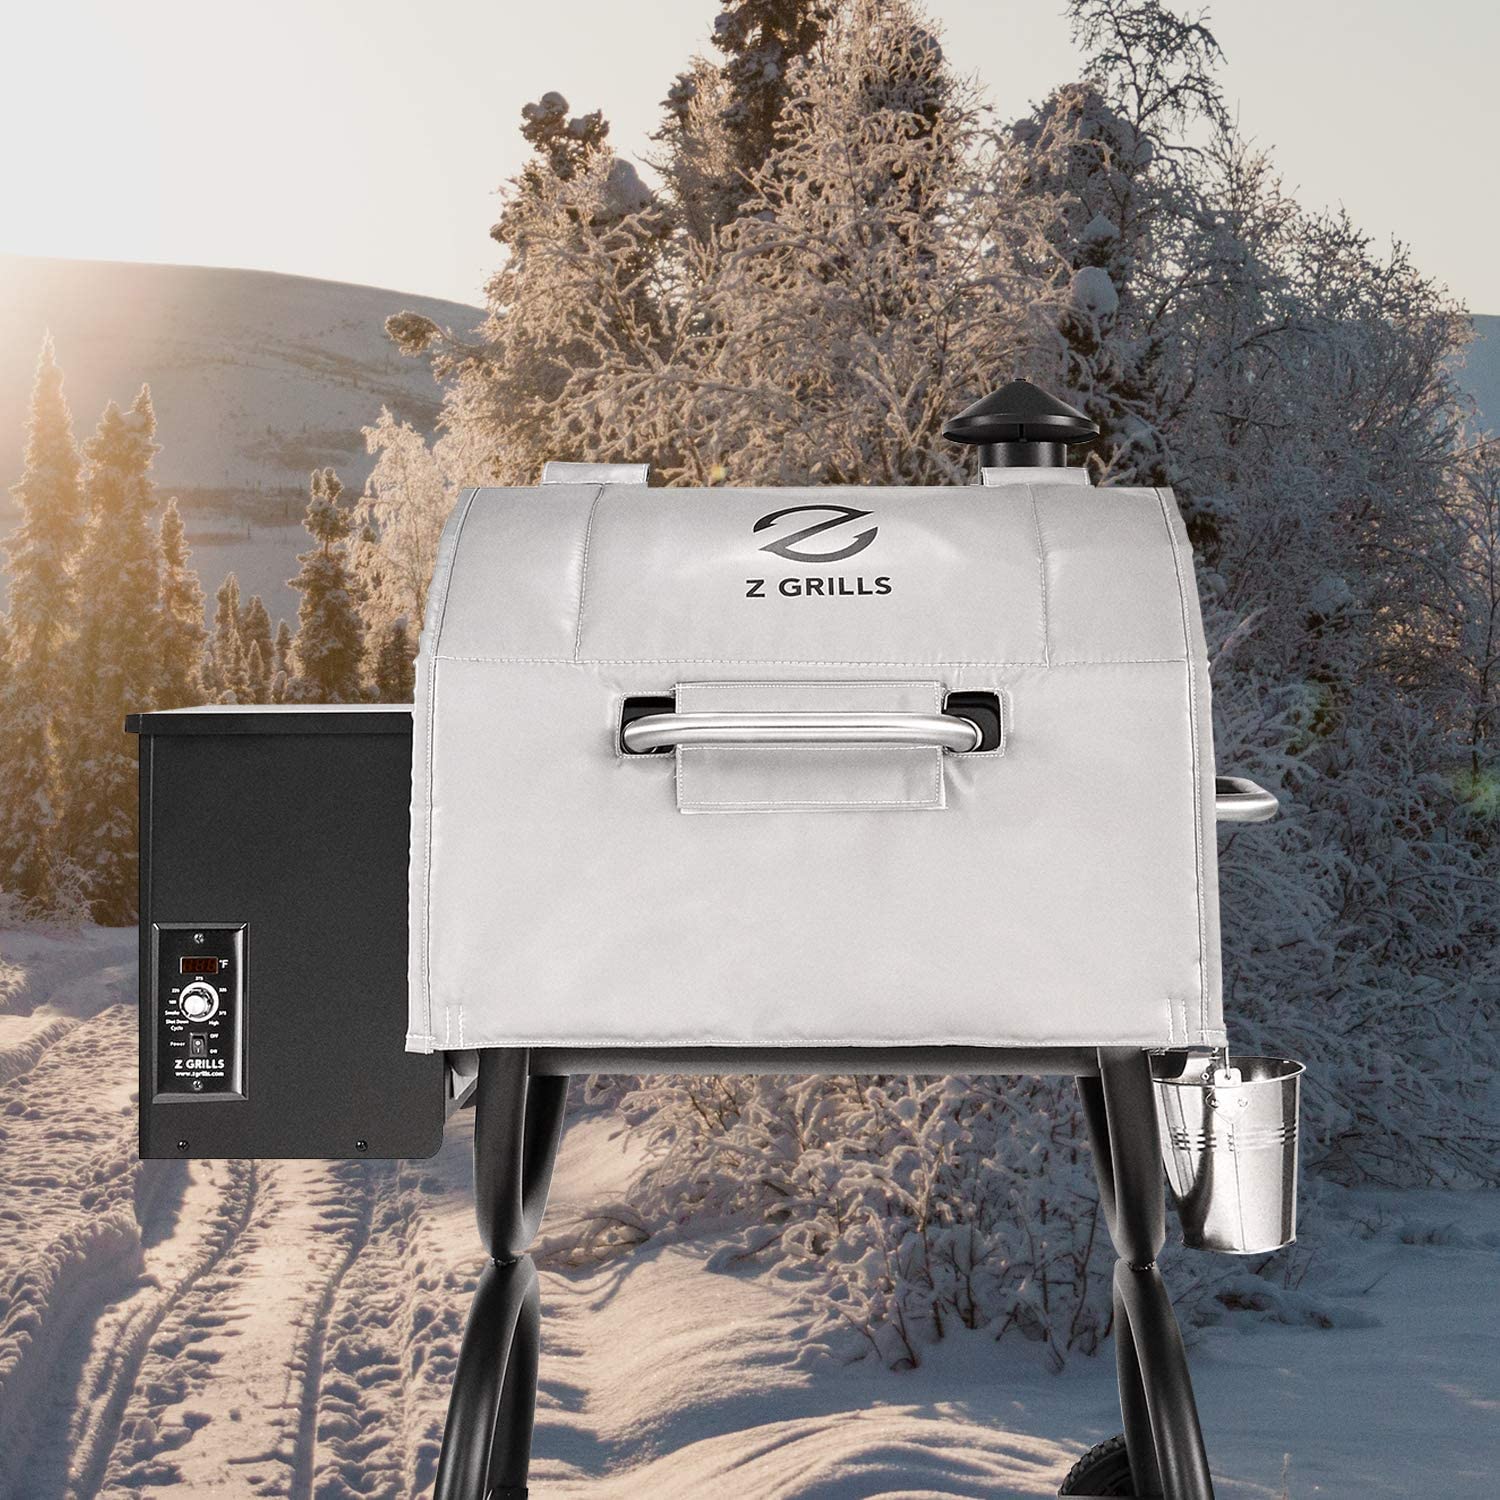 Z GRILLS Thermal Blanket for ZPG 550A -Keep Consistent temperatures & Save Pellet-Enjoy BBQ All Year Round Even Cold Winter - image 4 of 7